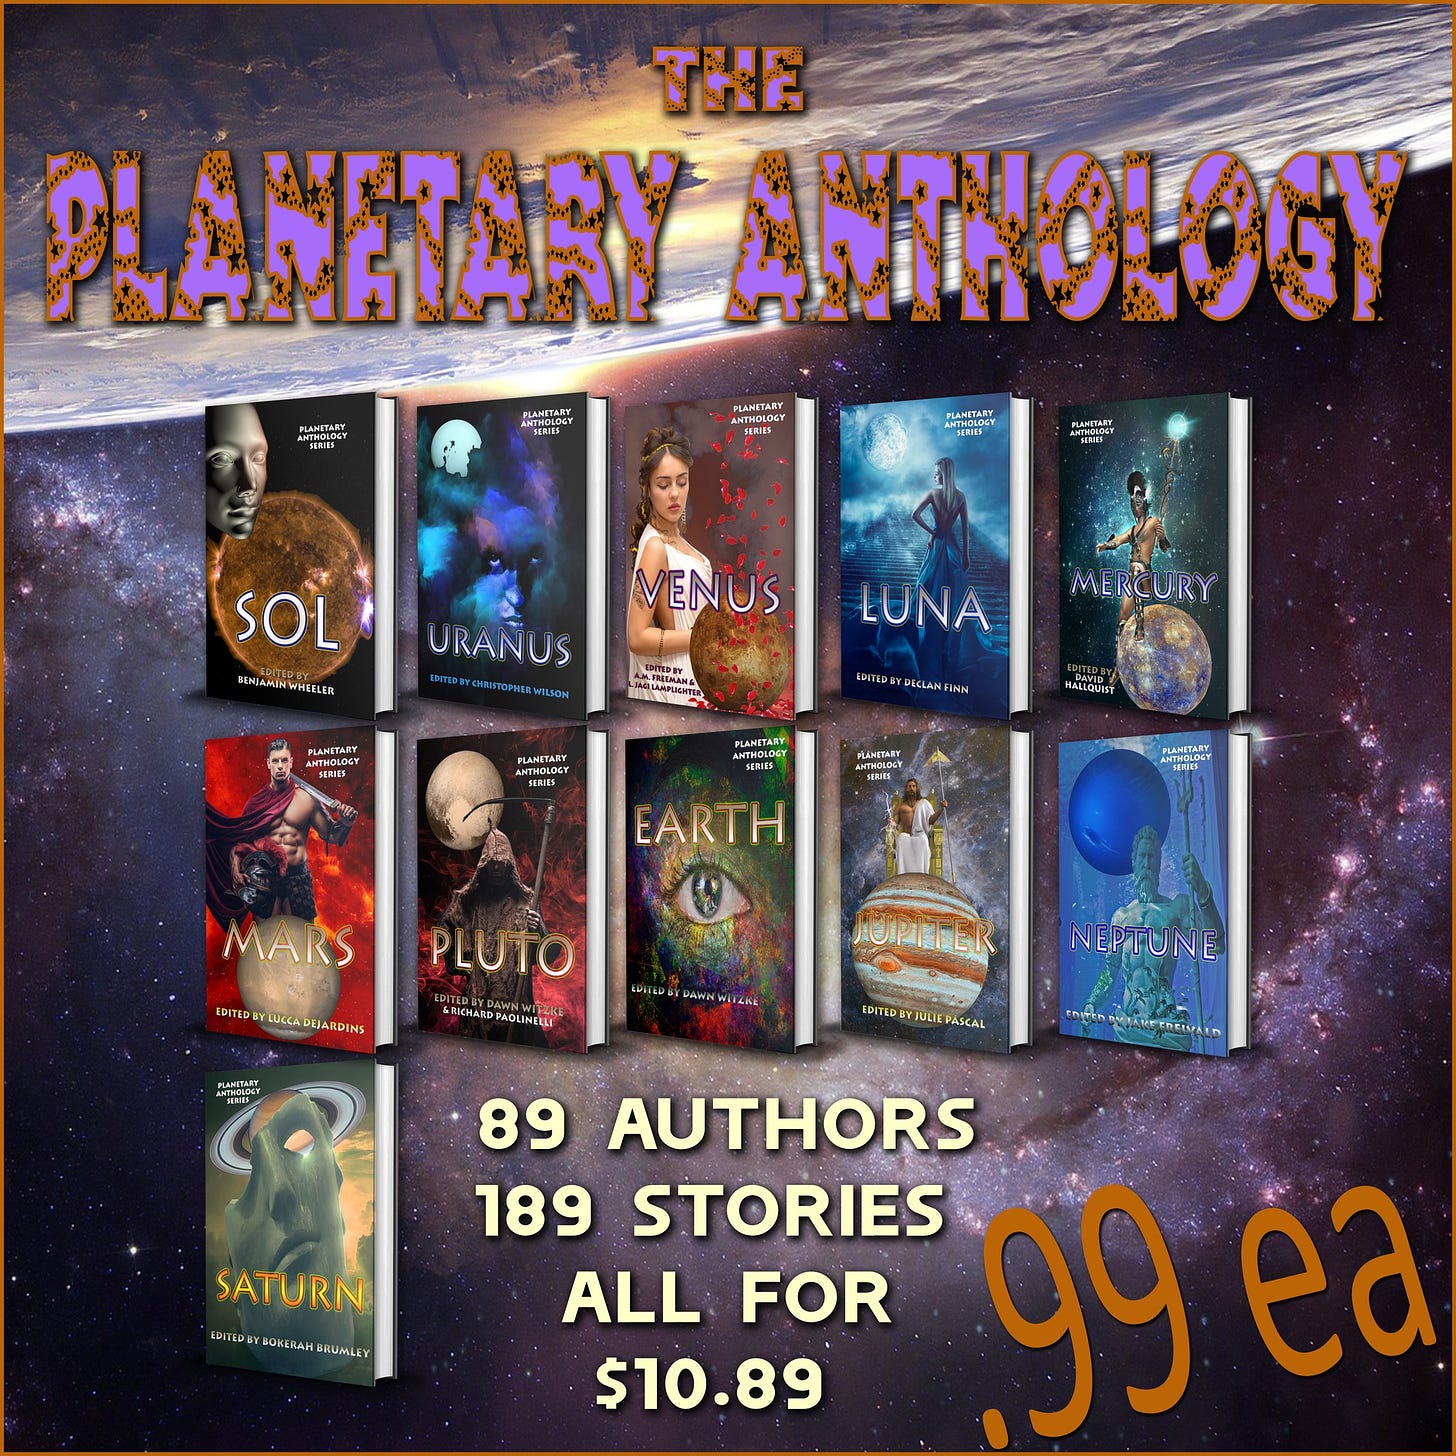 May be an image of 2 people and text that says 'THE PLANETARY ANTHOLOGY PLANETARY SOL BENJAMINWHEELER VENU'S URANUS LUNA CURY PLANETARY ASERIES A EARTH MARS PLUTO JUPITER NEPTUNE SATURN 89 AUTHORS 189 STORIES 99 ALL FOR ea $10.89'